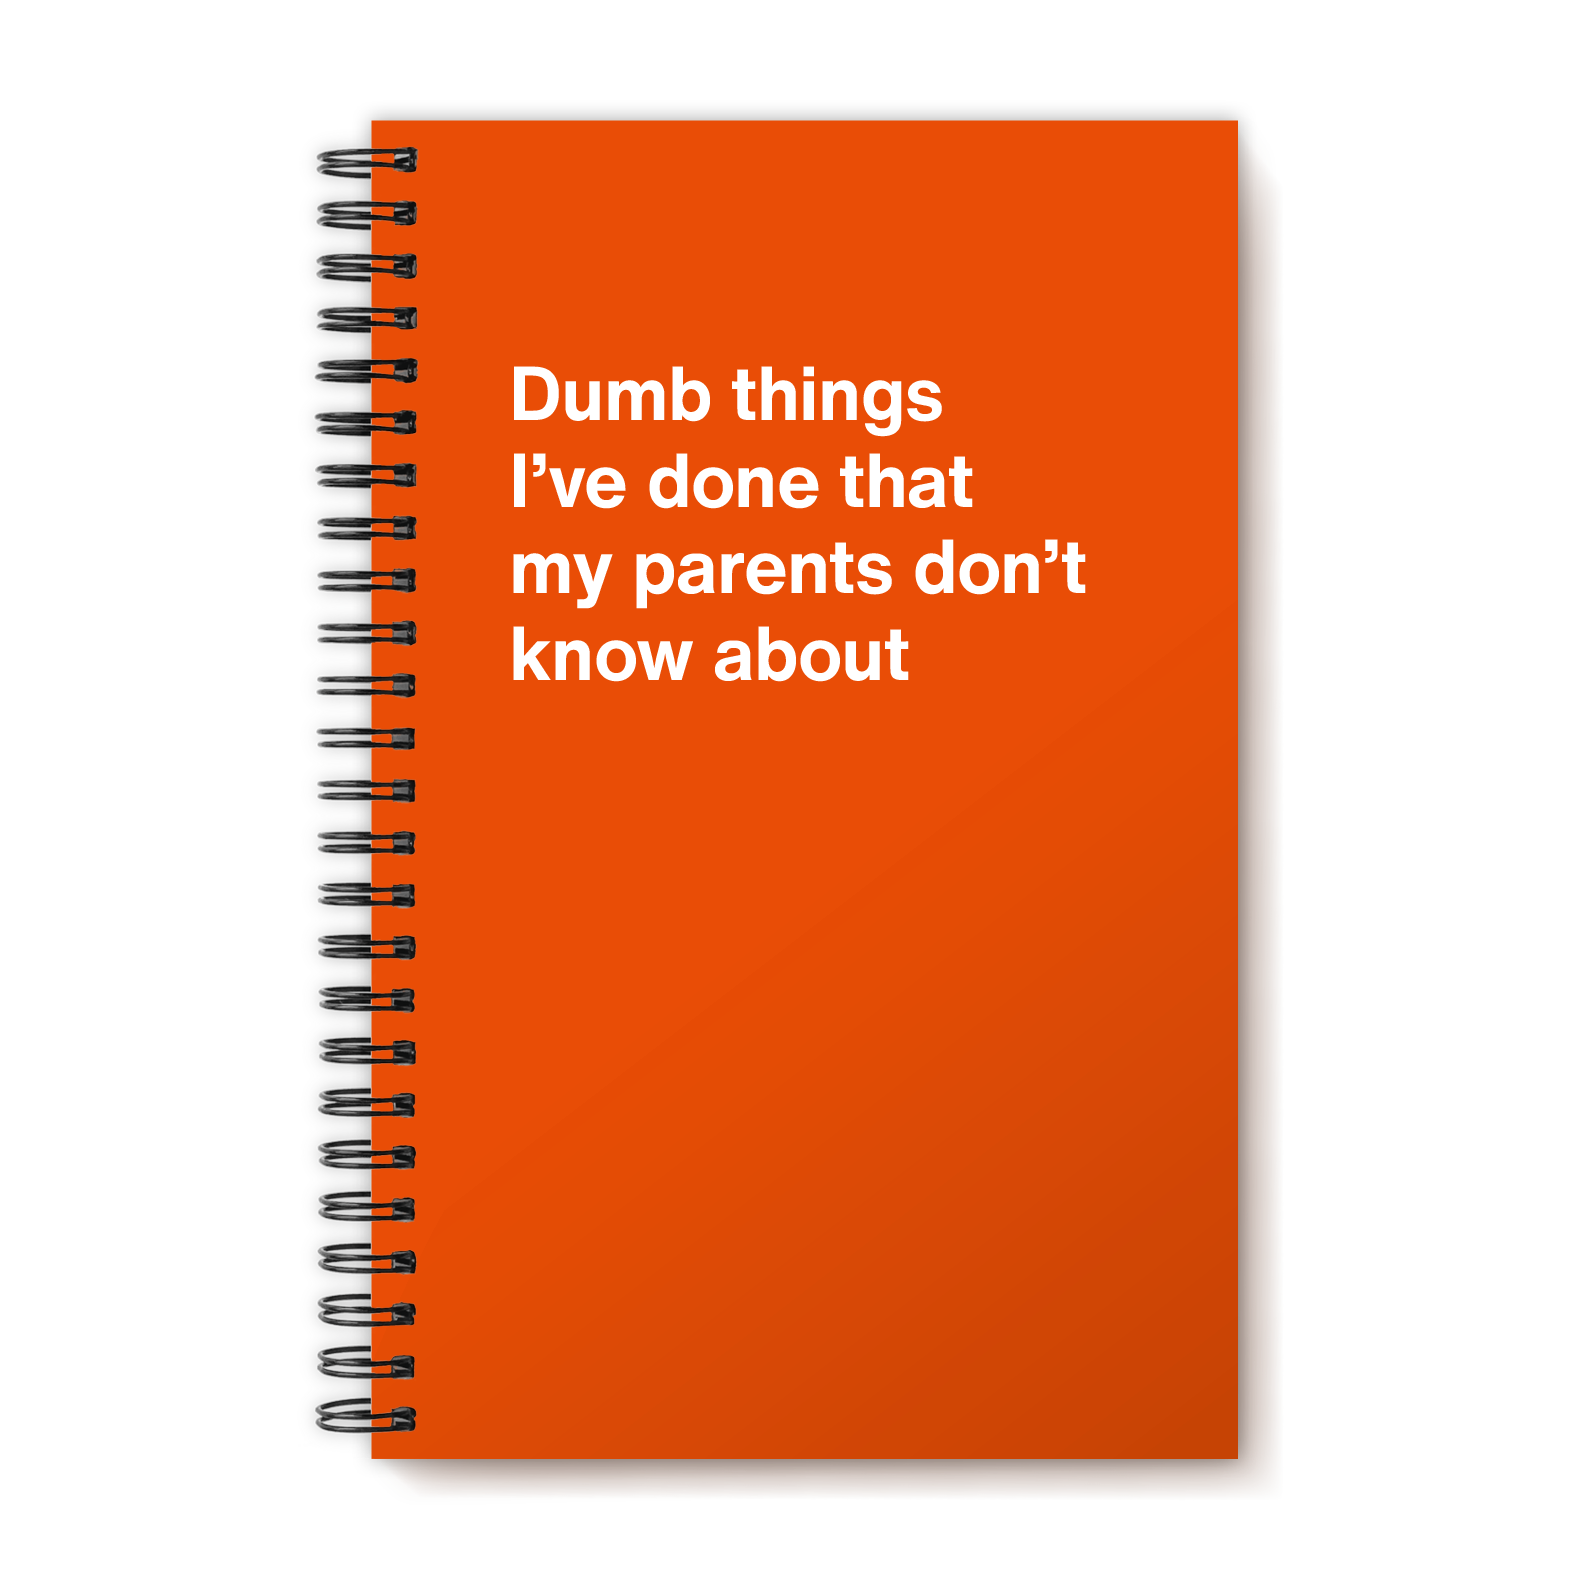 Dumb things I’ve done that my parents don’t know about | WTF Notebooks